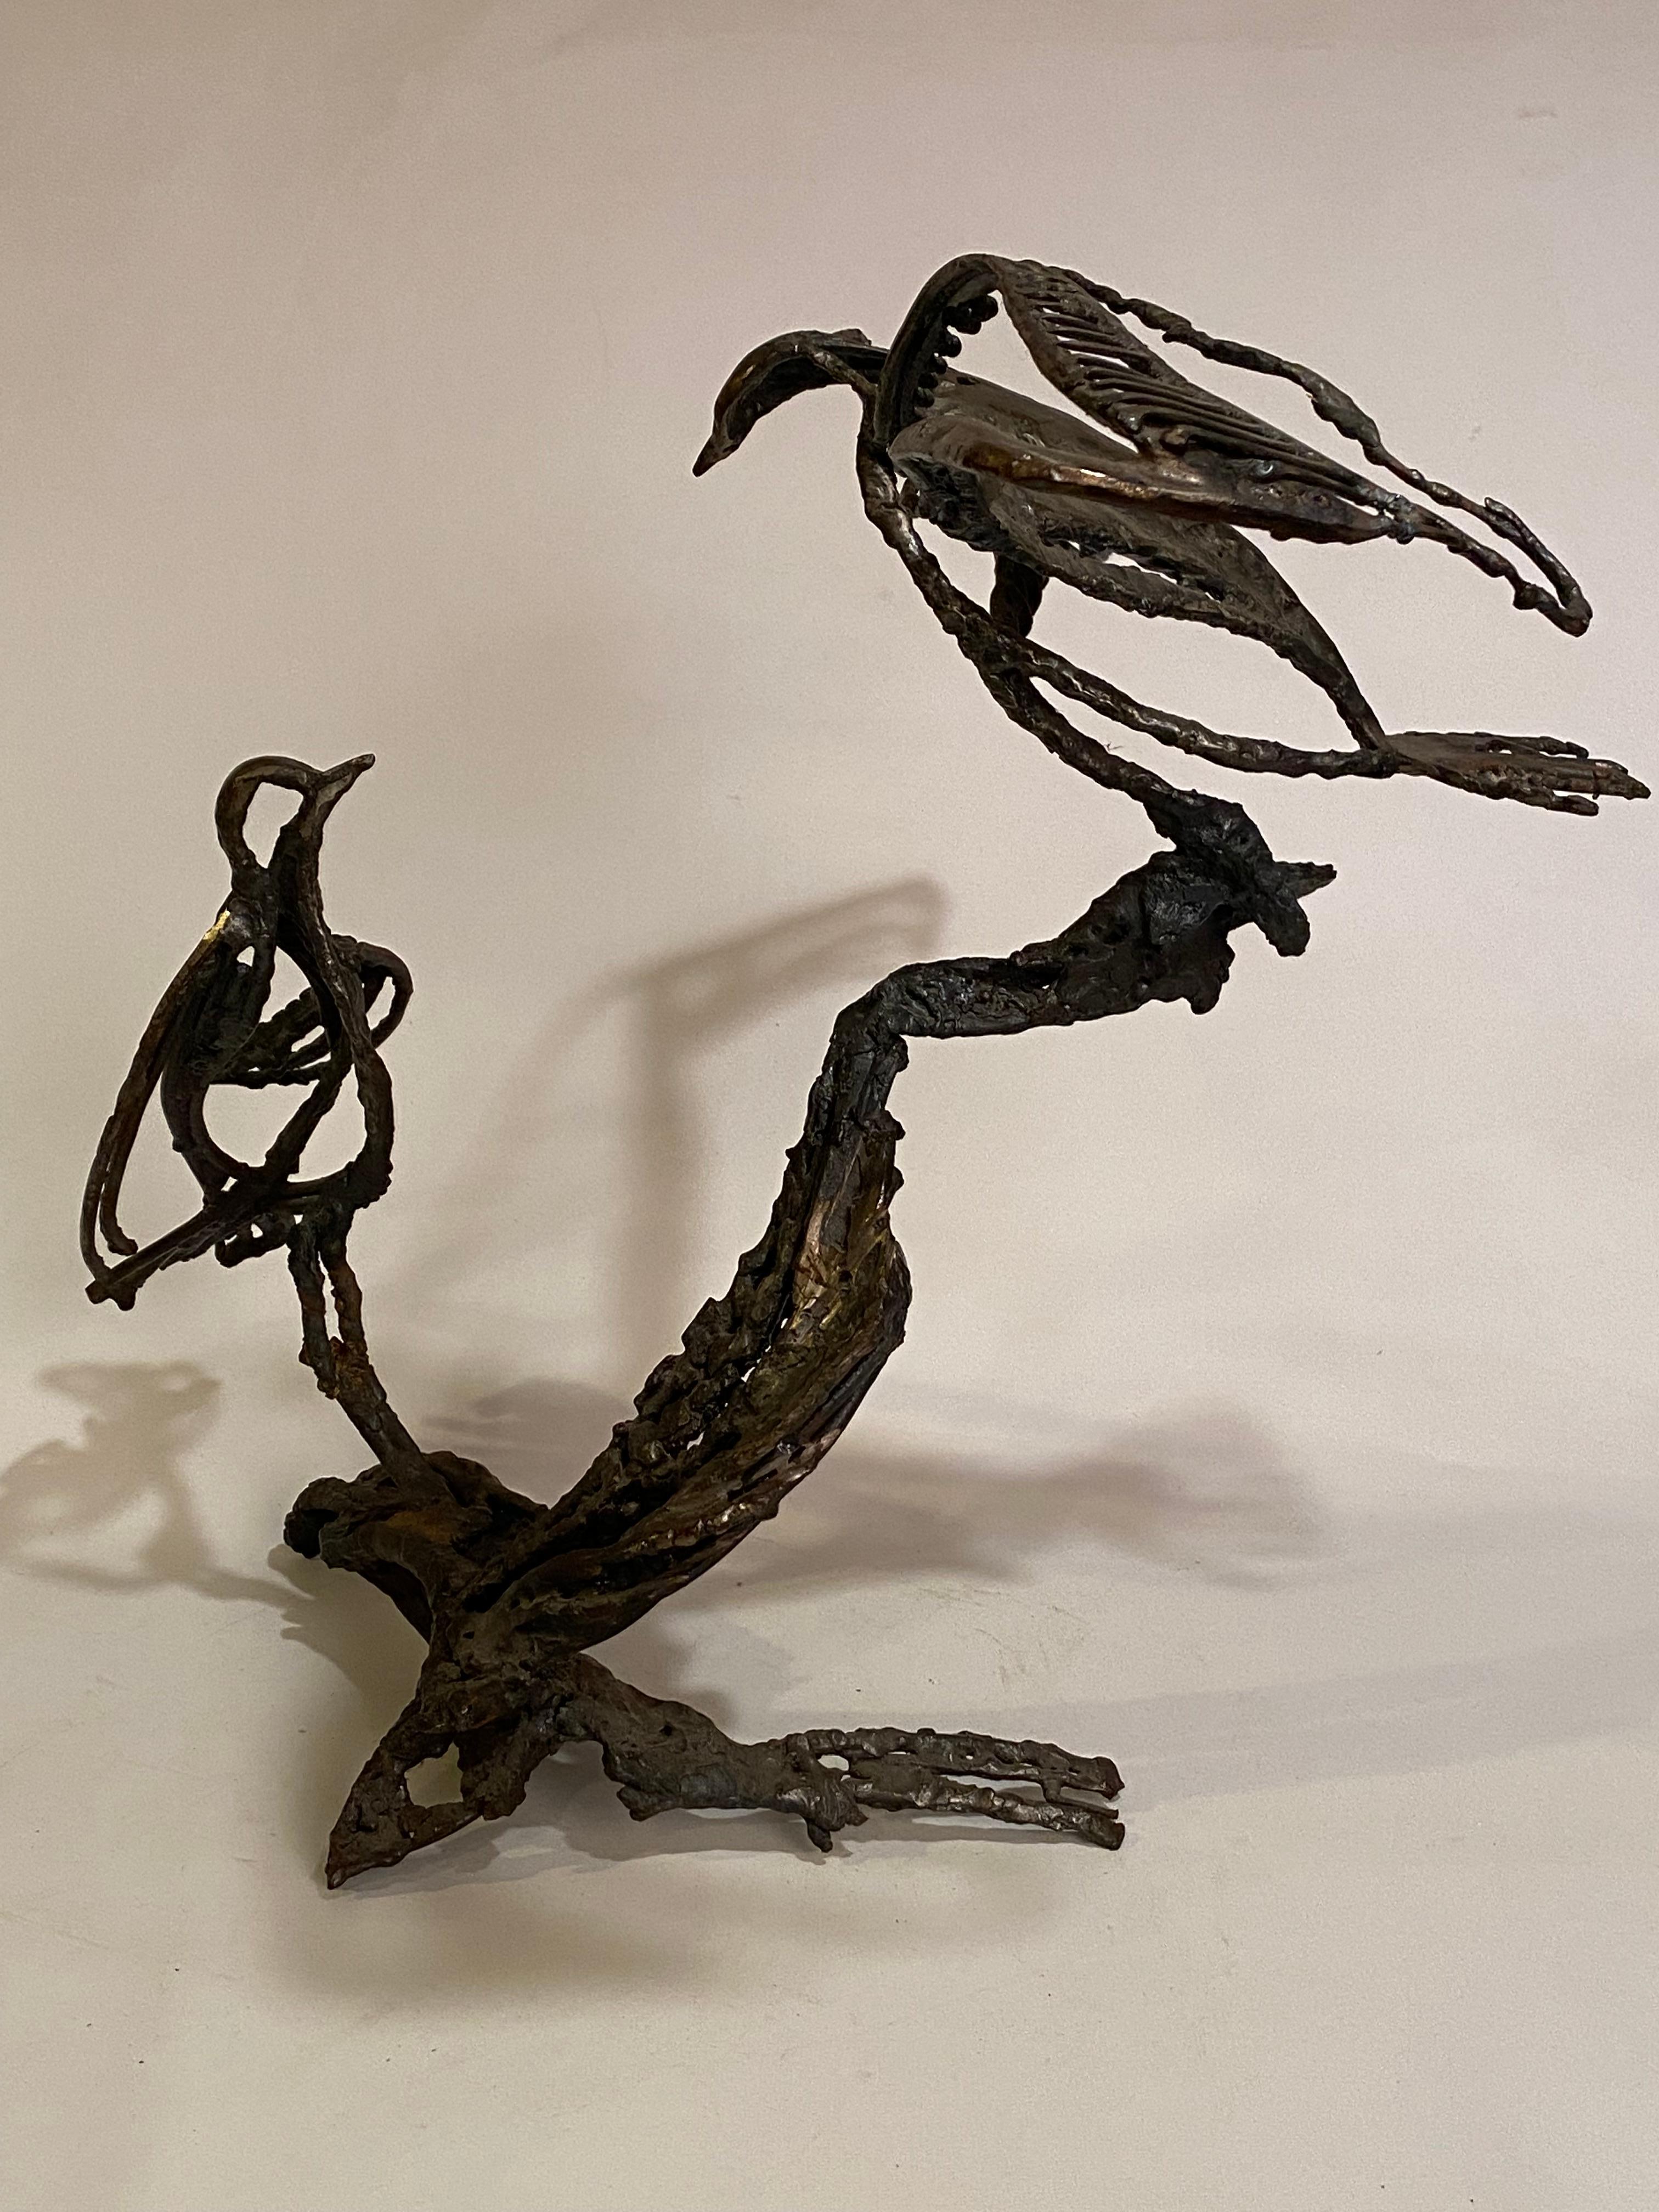 Brutalist iron bird sculpture by Argentine artist, Miguel Van Esso (1955- ). Painstakingly rendered ' skeletal style sculpture of two birds on a perch. Possibly parent teaching baby how to fly or feeding time. Signed Van Esso with indecipherable